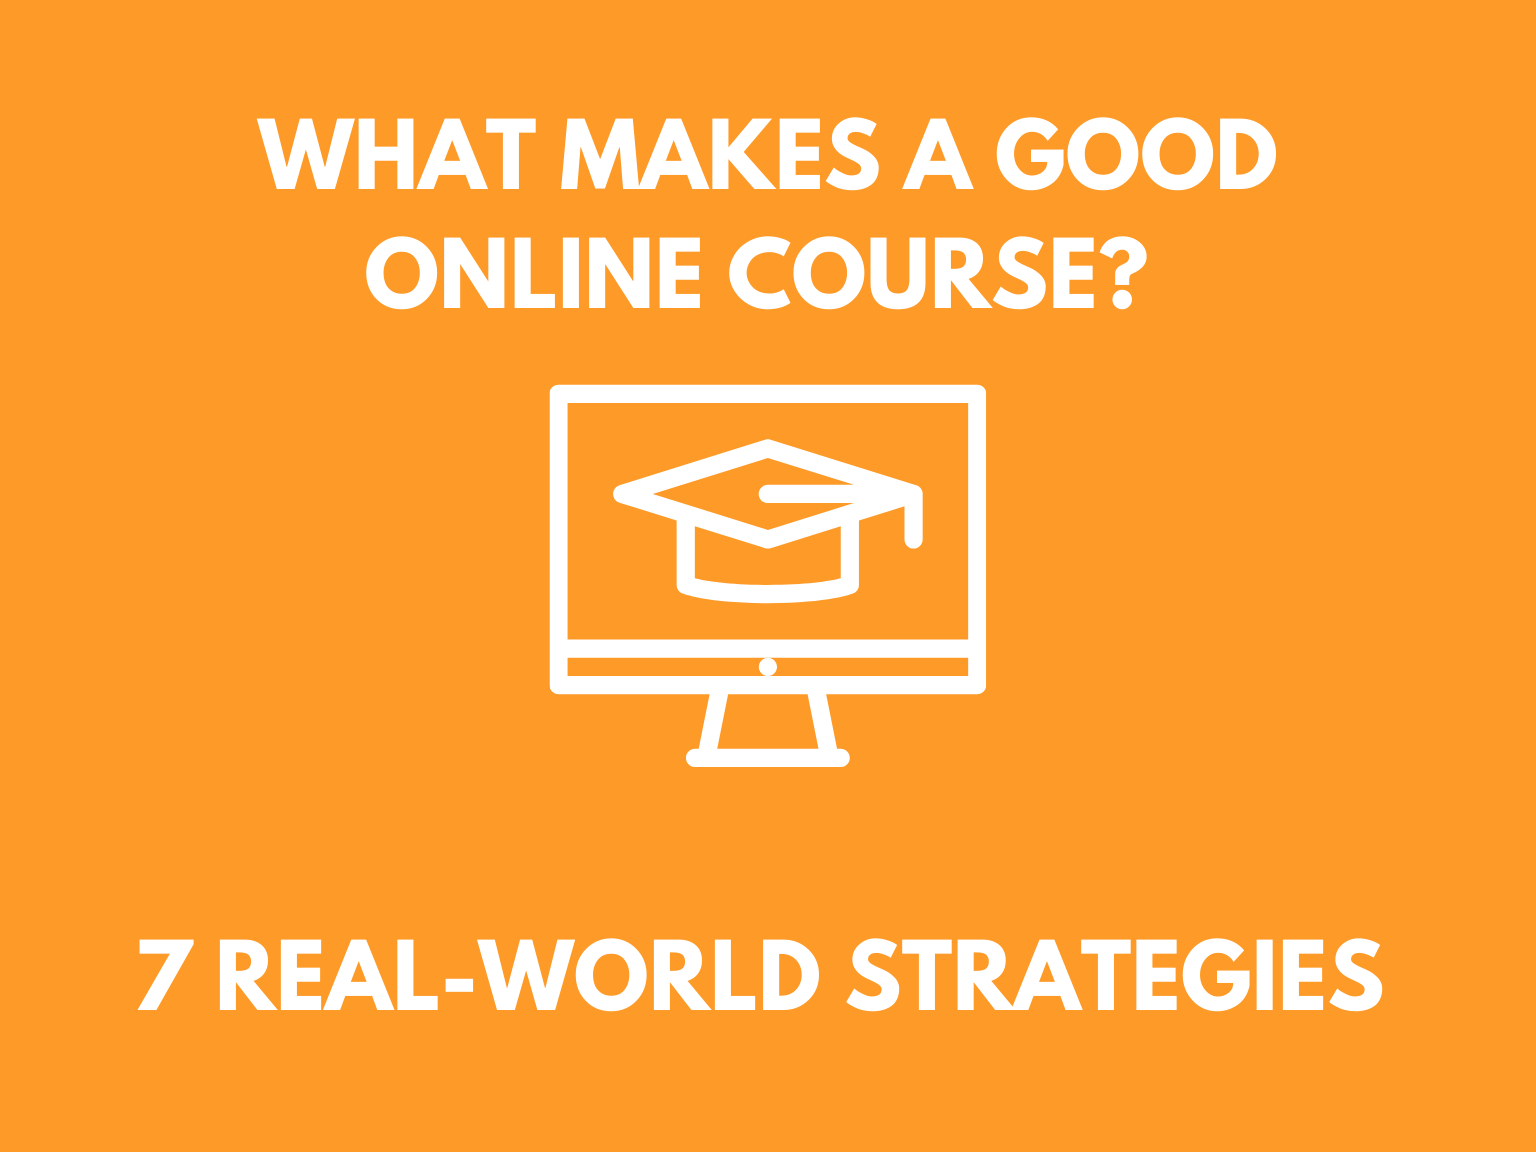 What Makes a Good Online Course? 7 Real-World Strategies